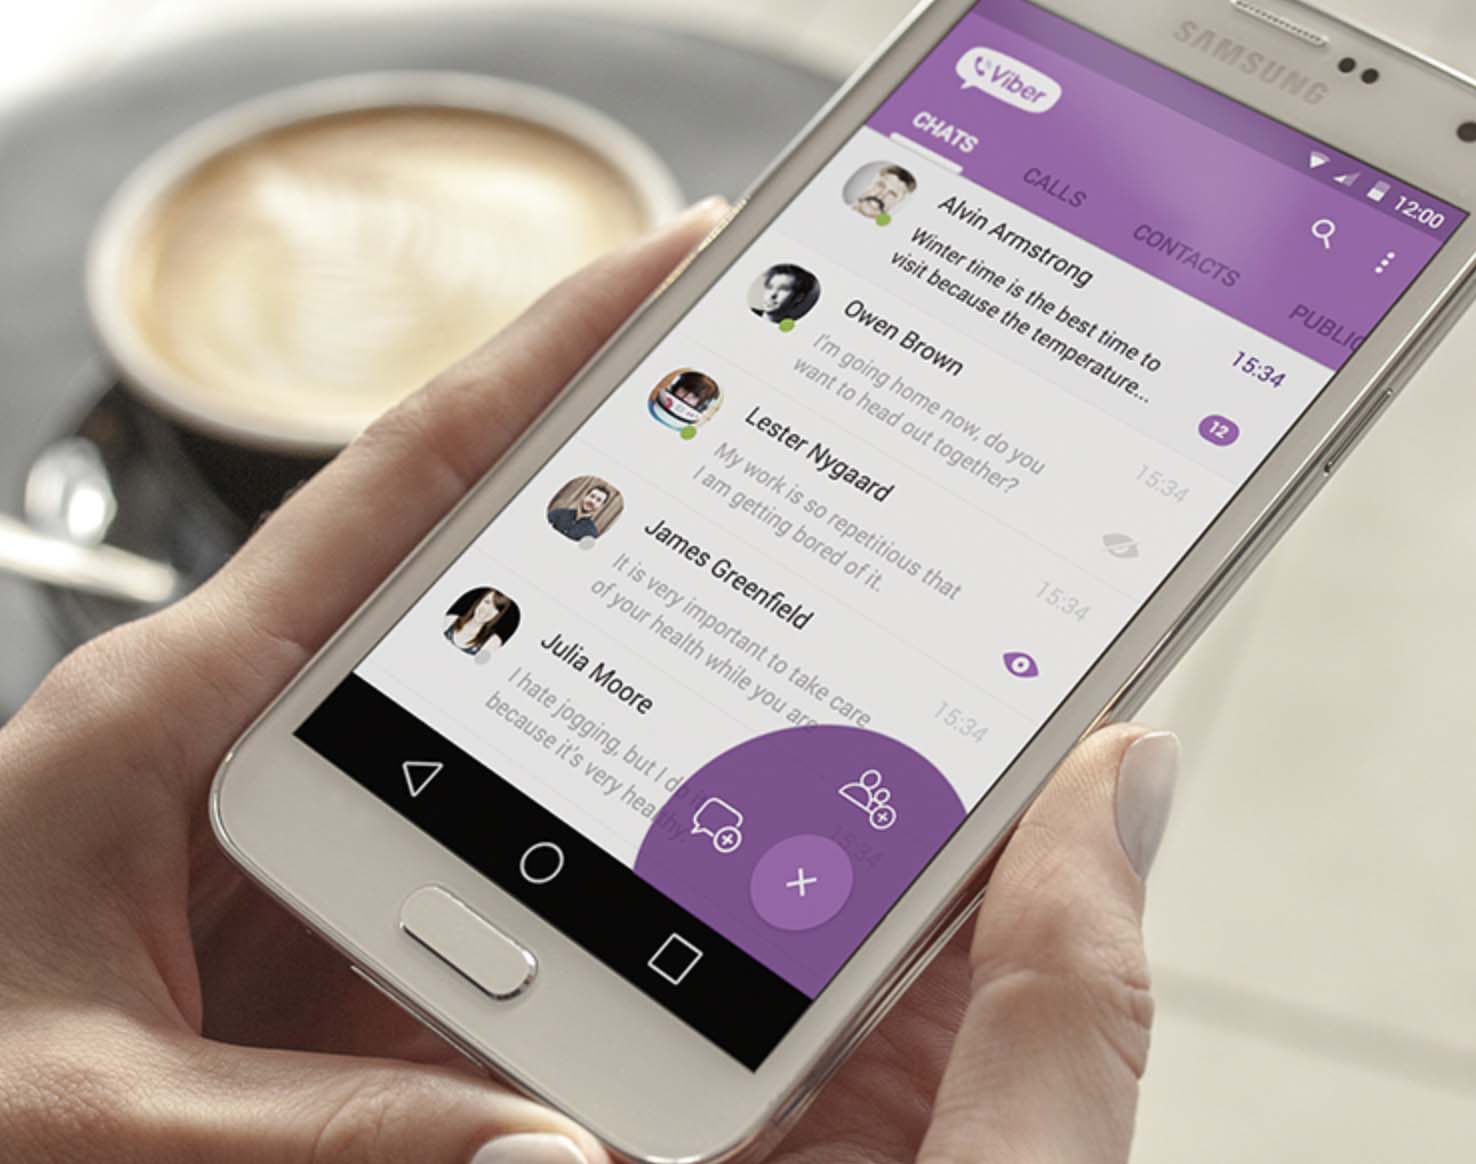 Spy on the other half in Viber should be remote